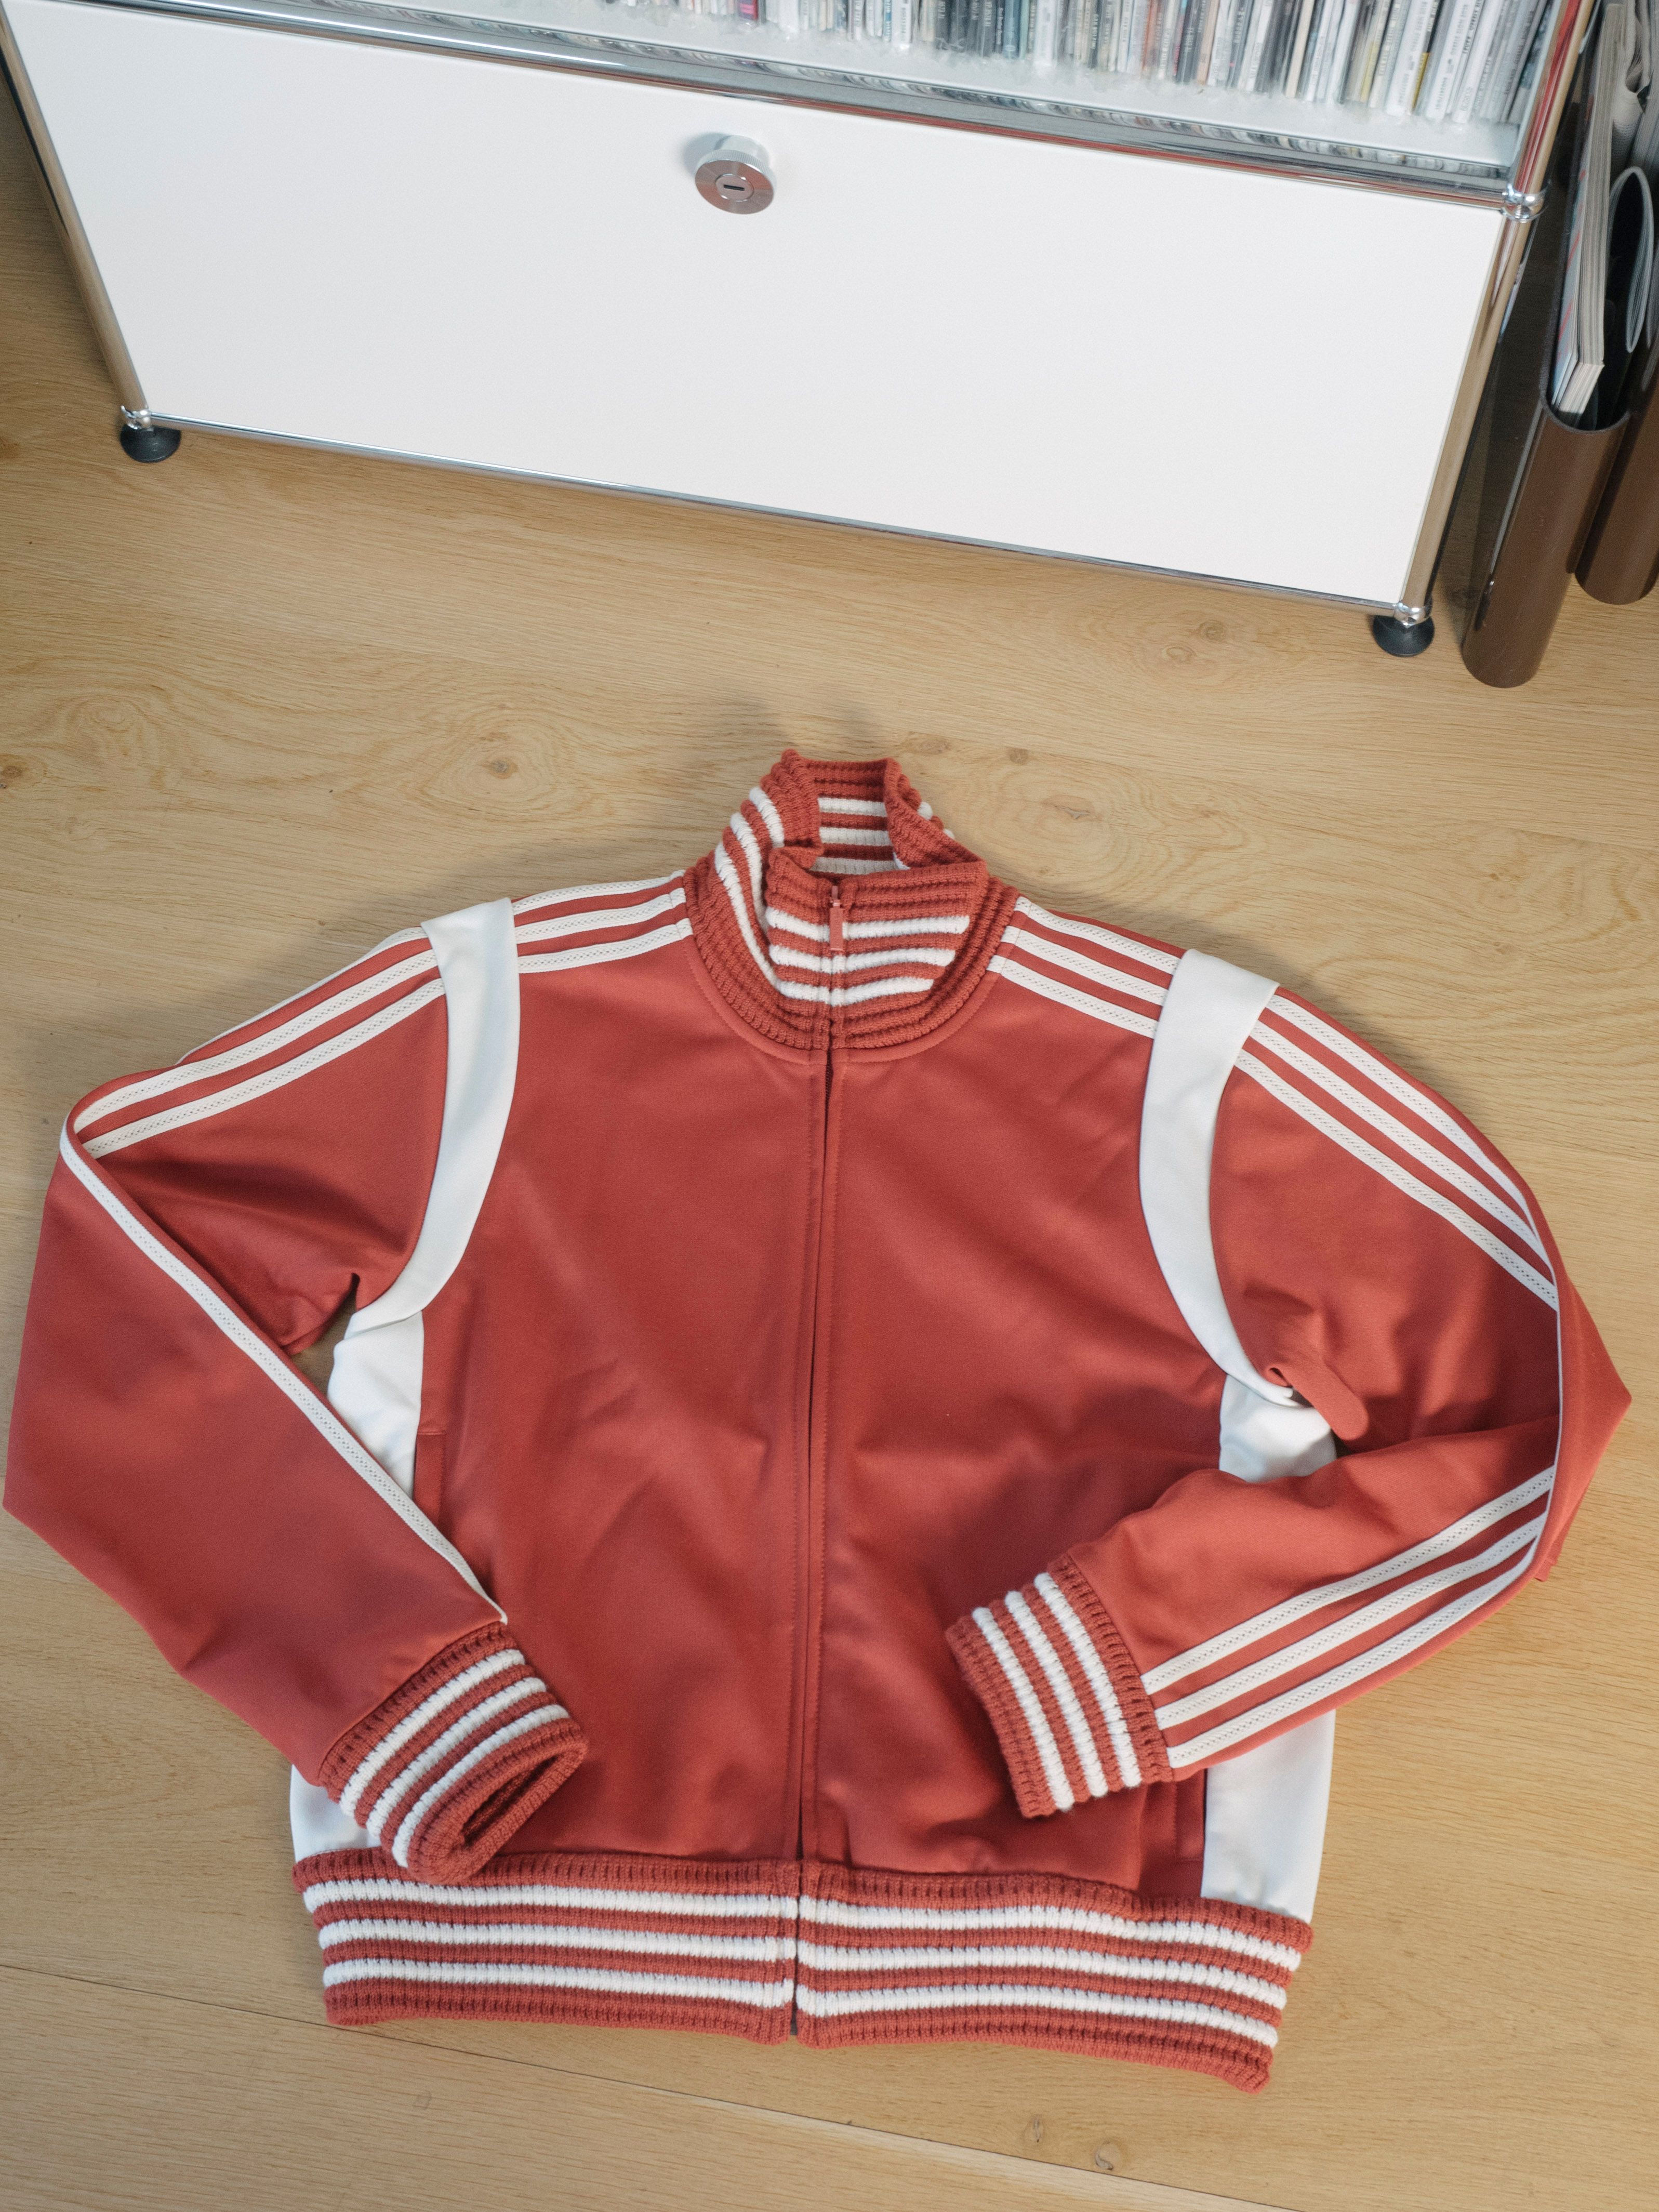 Adidas Wales Bonner x Adidas Lovers Track Top